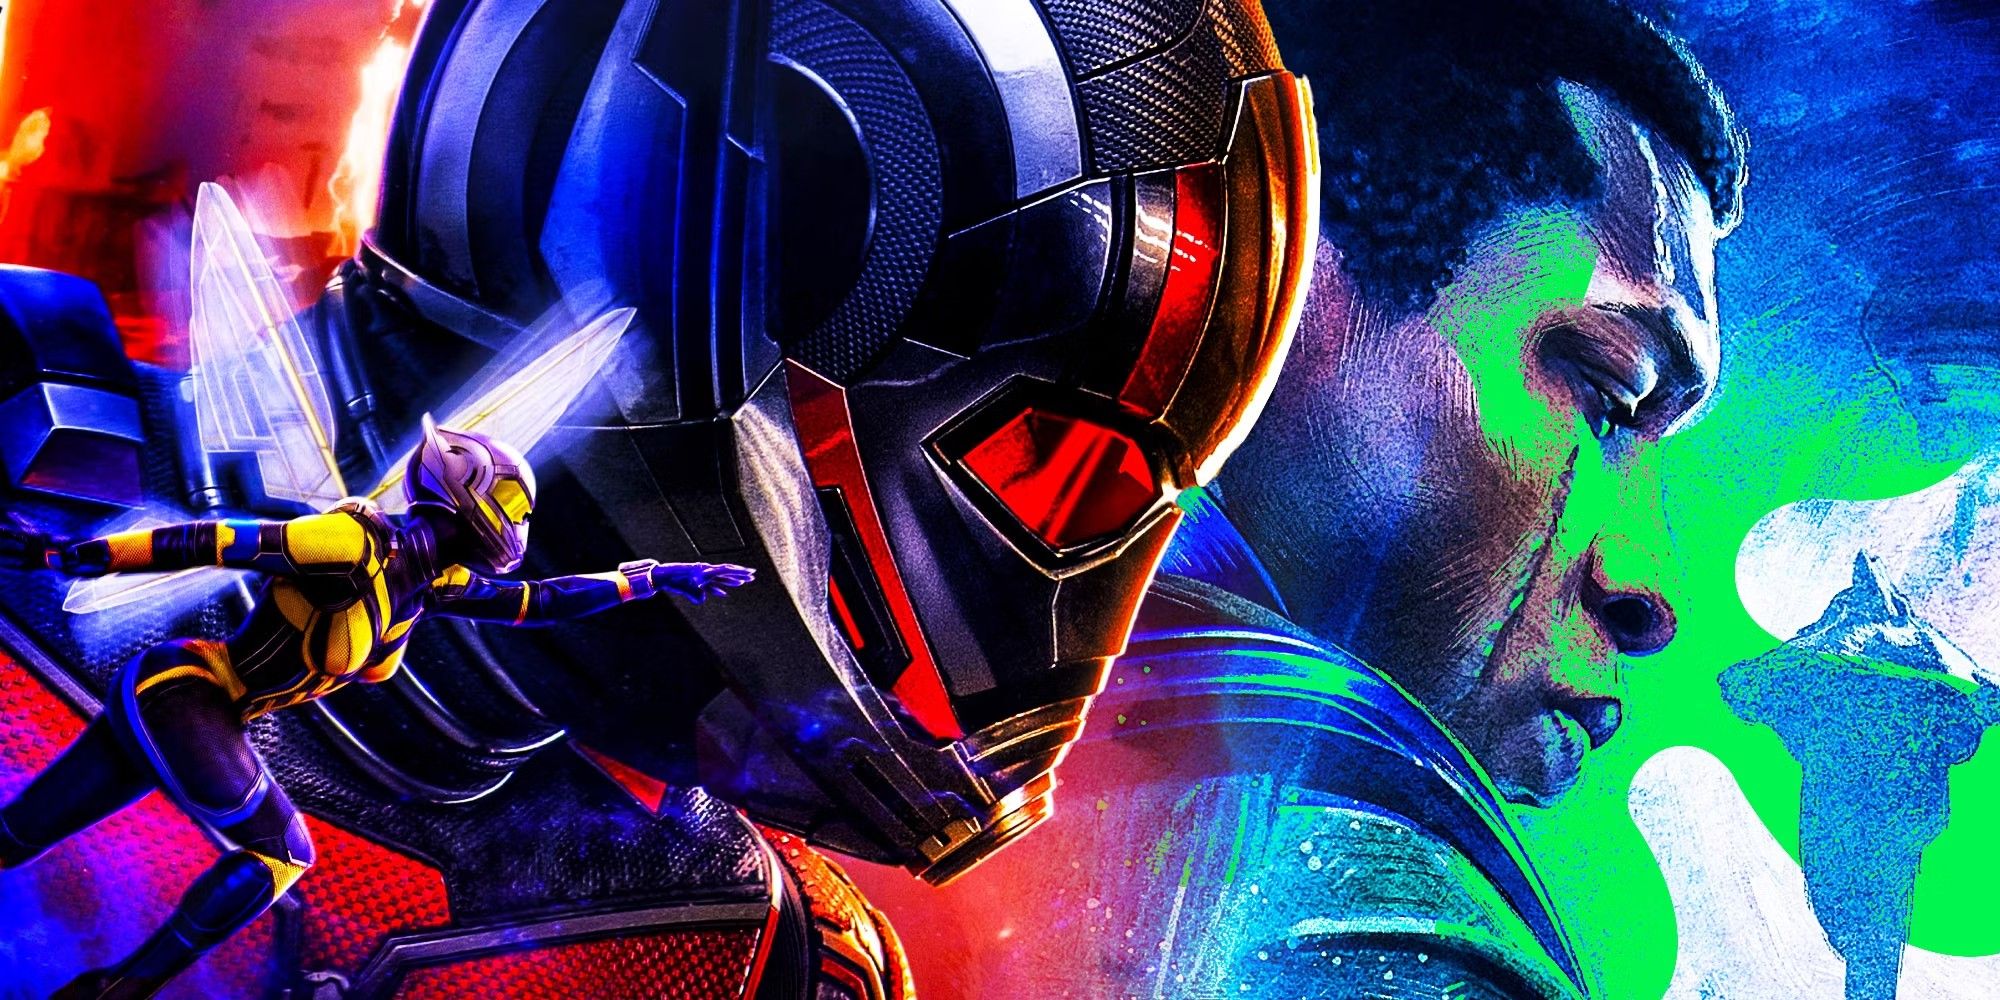 Ant-Man And The Wasp: Quantumania: Rotten Tomatoes Rating Is Out & It's  Shockingly Lower Than Thor: Love And Thunder, Indicating Marvel's Downfall?